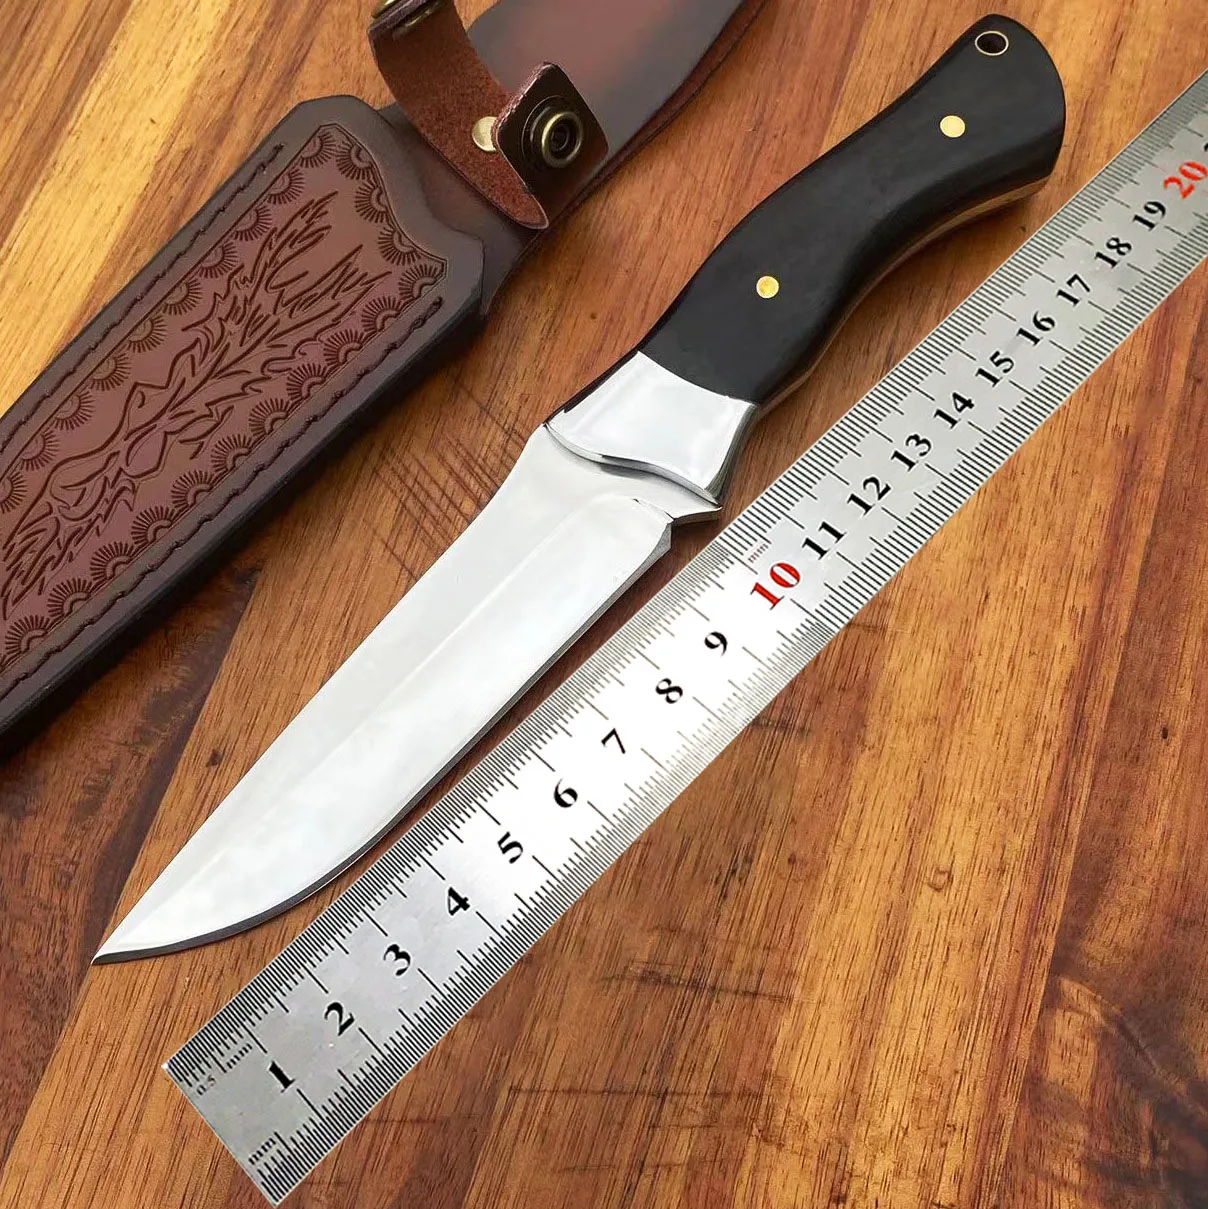 

Ebony Wood D2 Steel Fixed Blade Knife Outdoor Camping Survival Tactical Hunting Self Defense Knives for Men with Leather Case